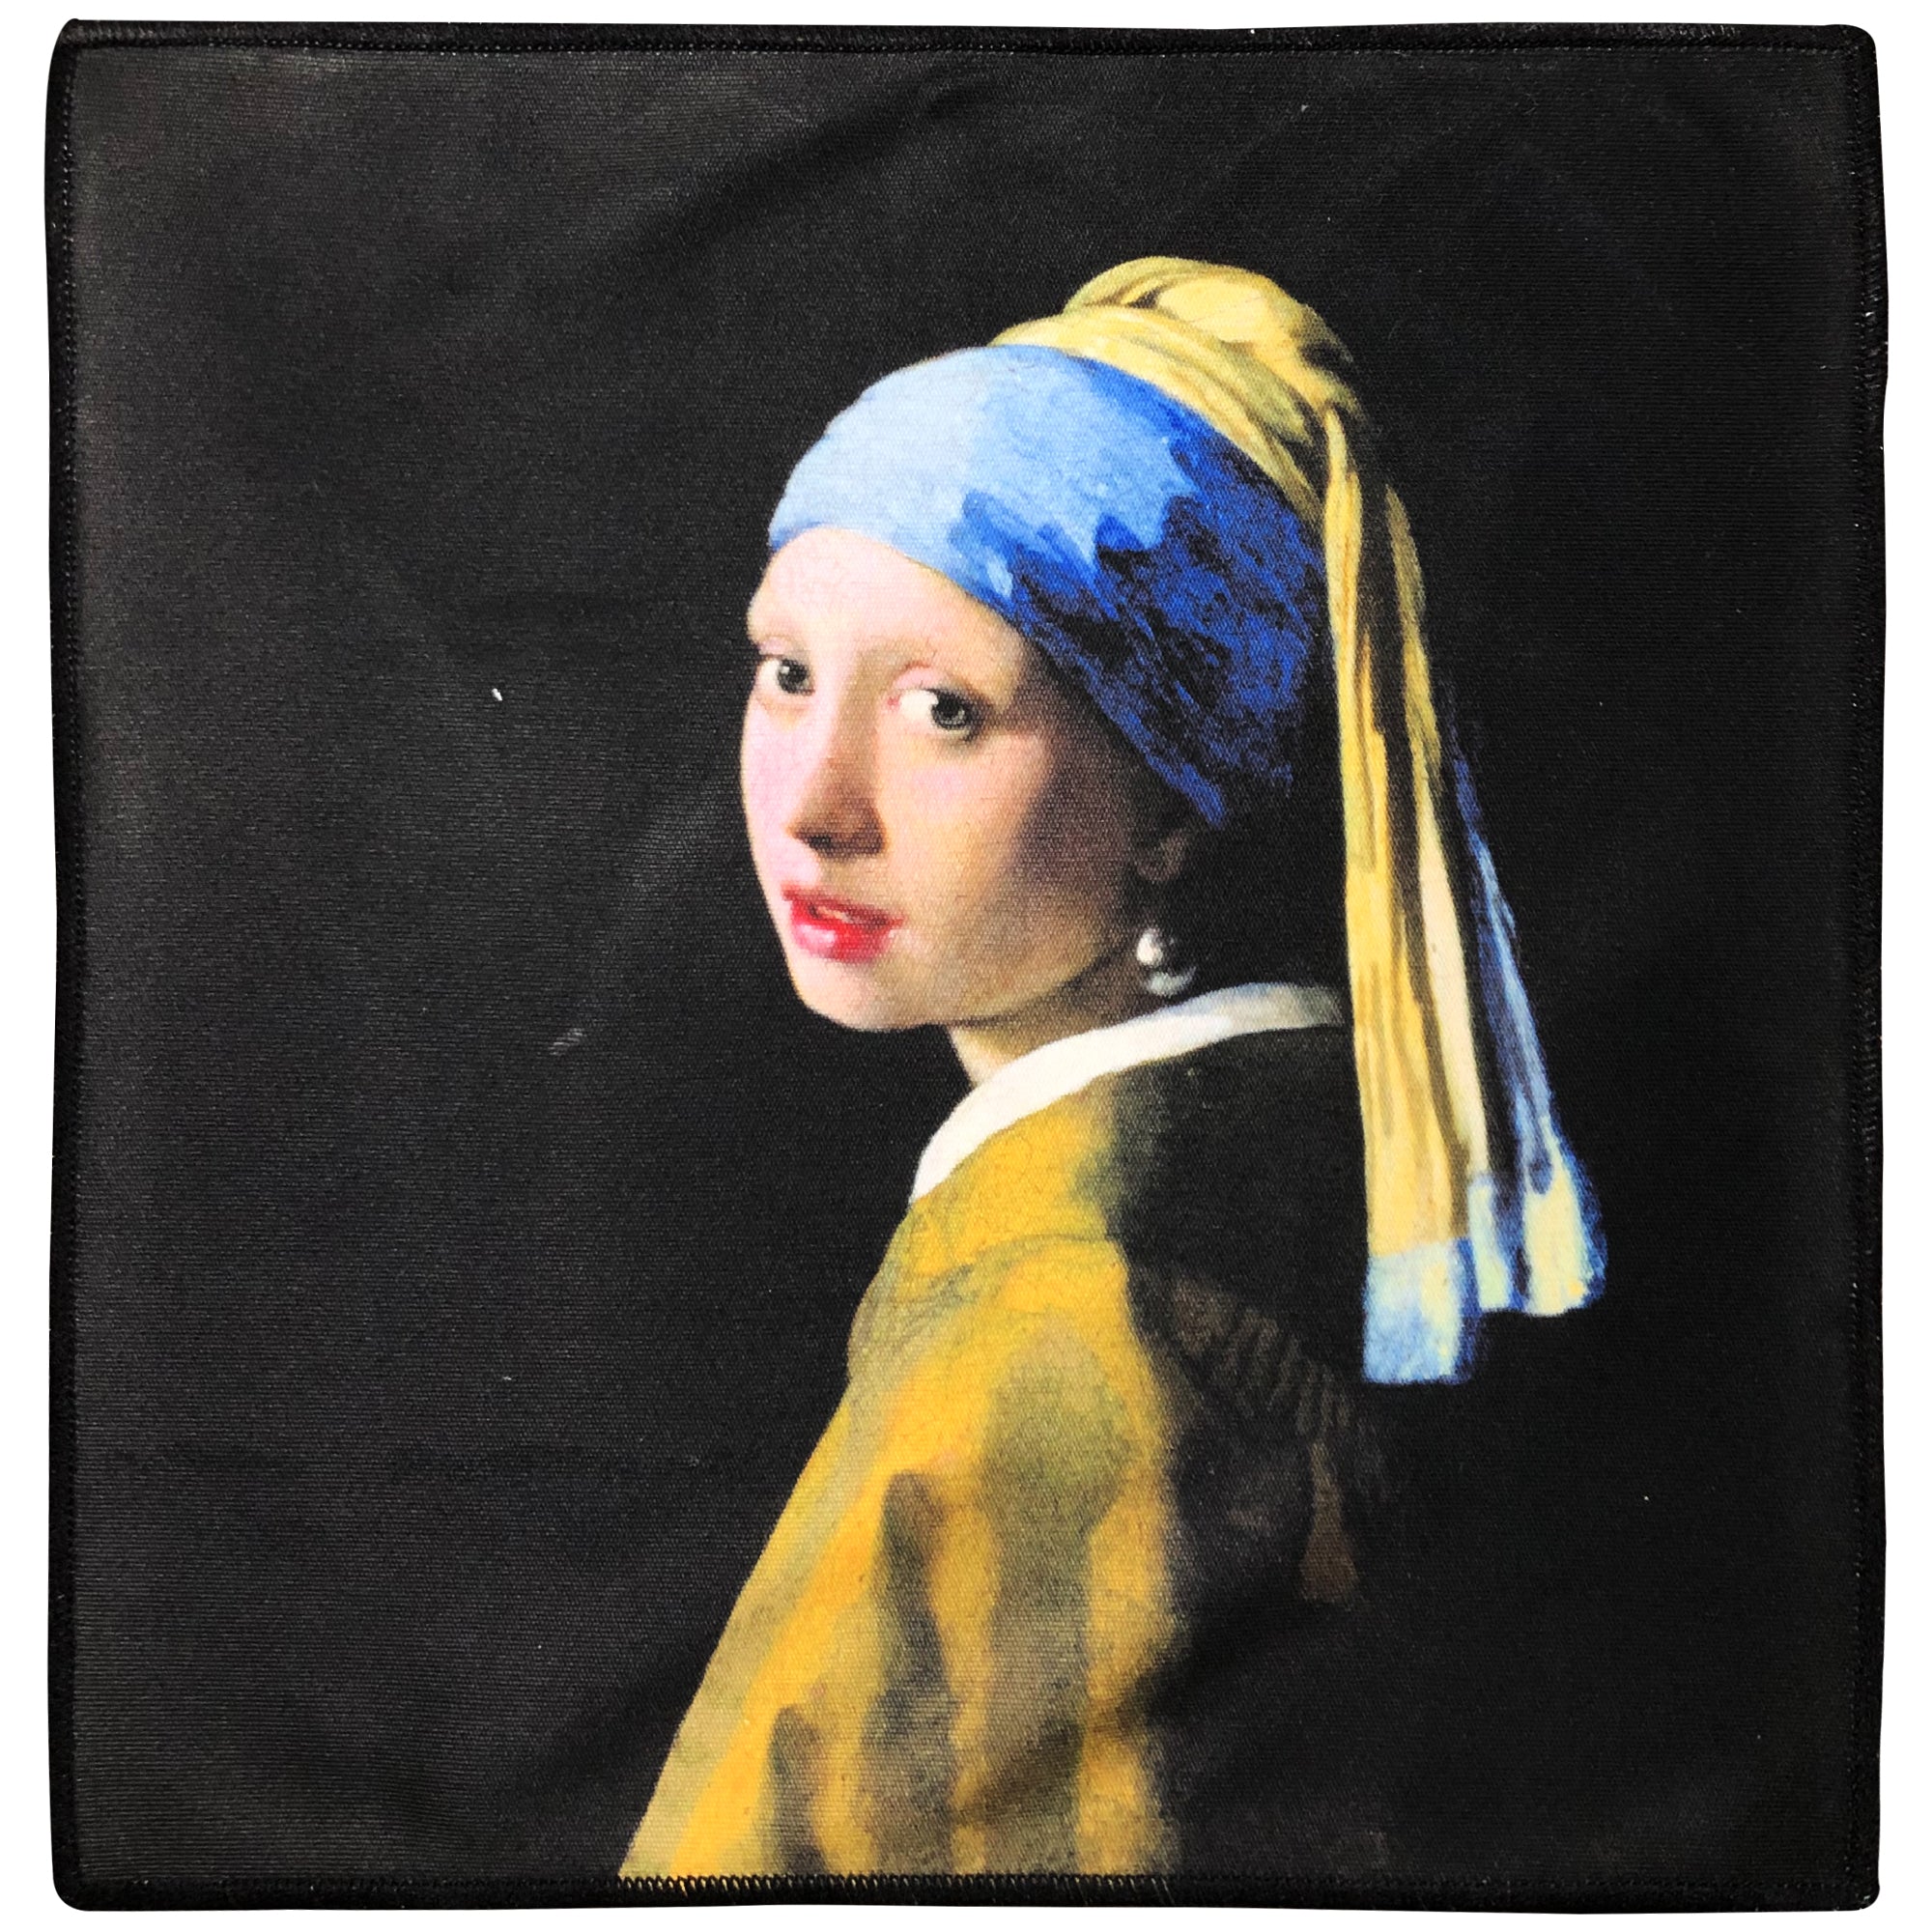 [6 Pack] Johannes Vermeer "Girl with a Pearl Earring" - Art Collection - Ultra Premium Quality Microfiber Cleaning Cloths